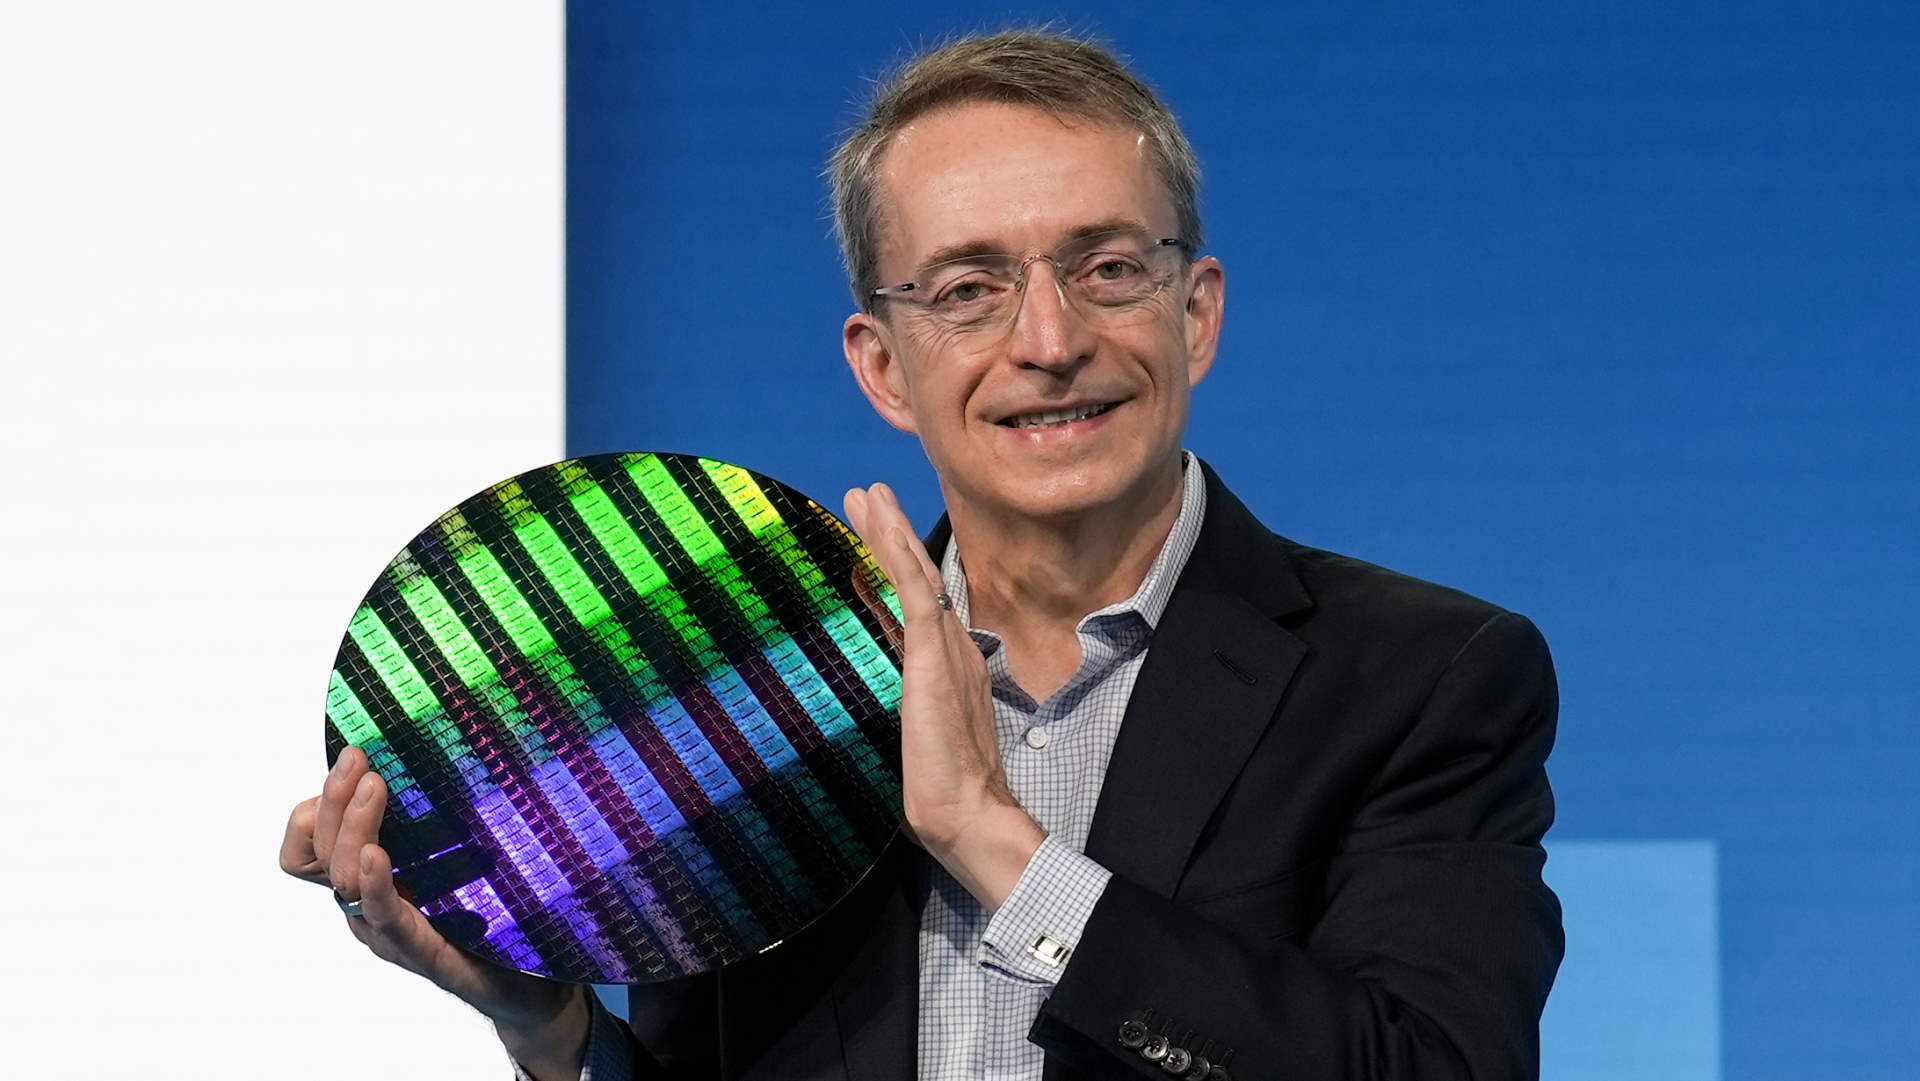  The PC industry has surely hit rock bottom as multi-billion dollar losses predicted for Intel this week 